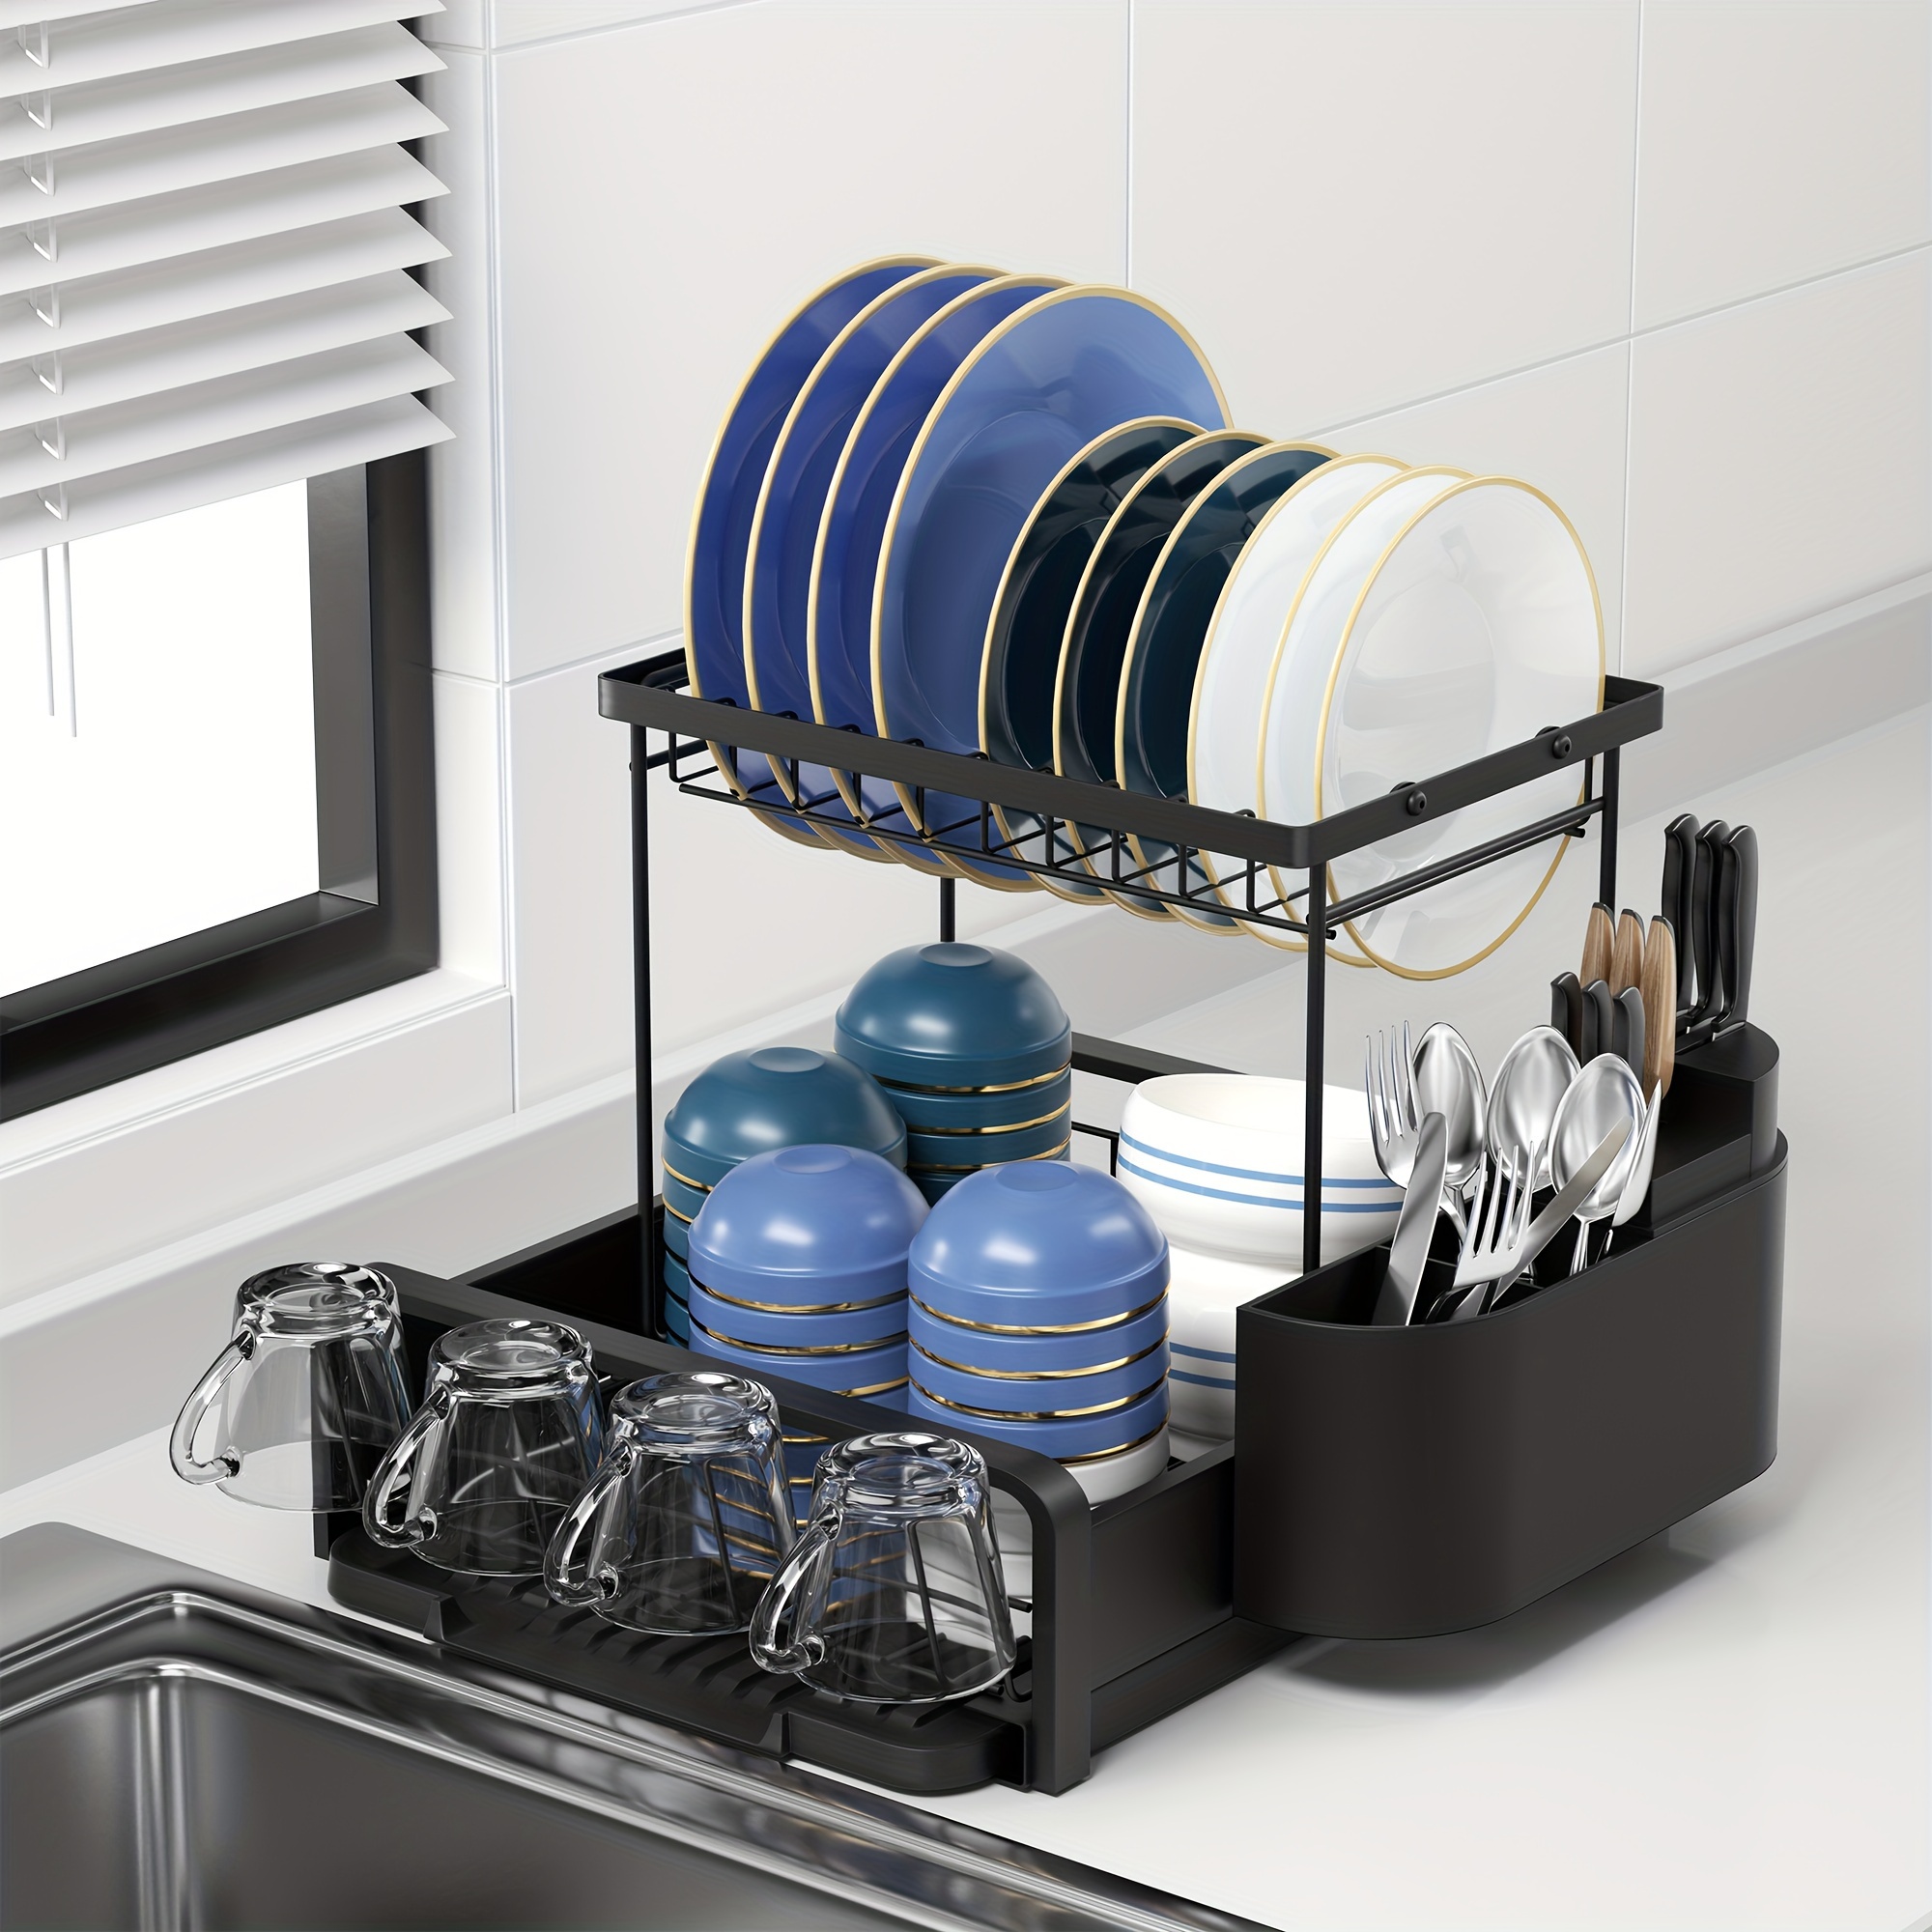 2-Tier Dish Drying Rack with Drainboard - On Sale - Bed Bath